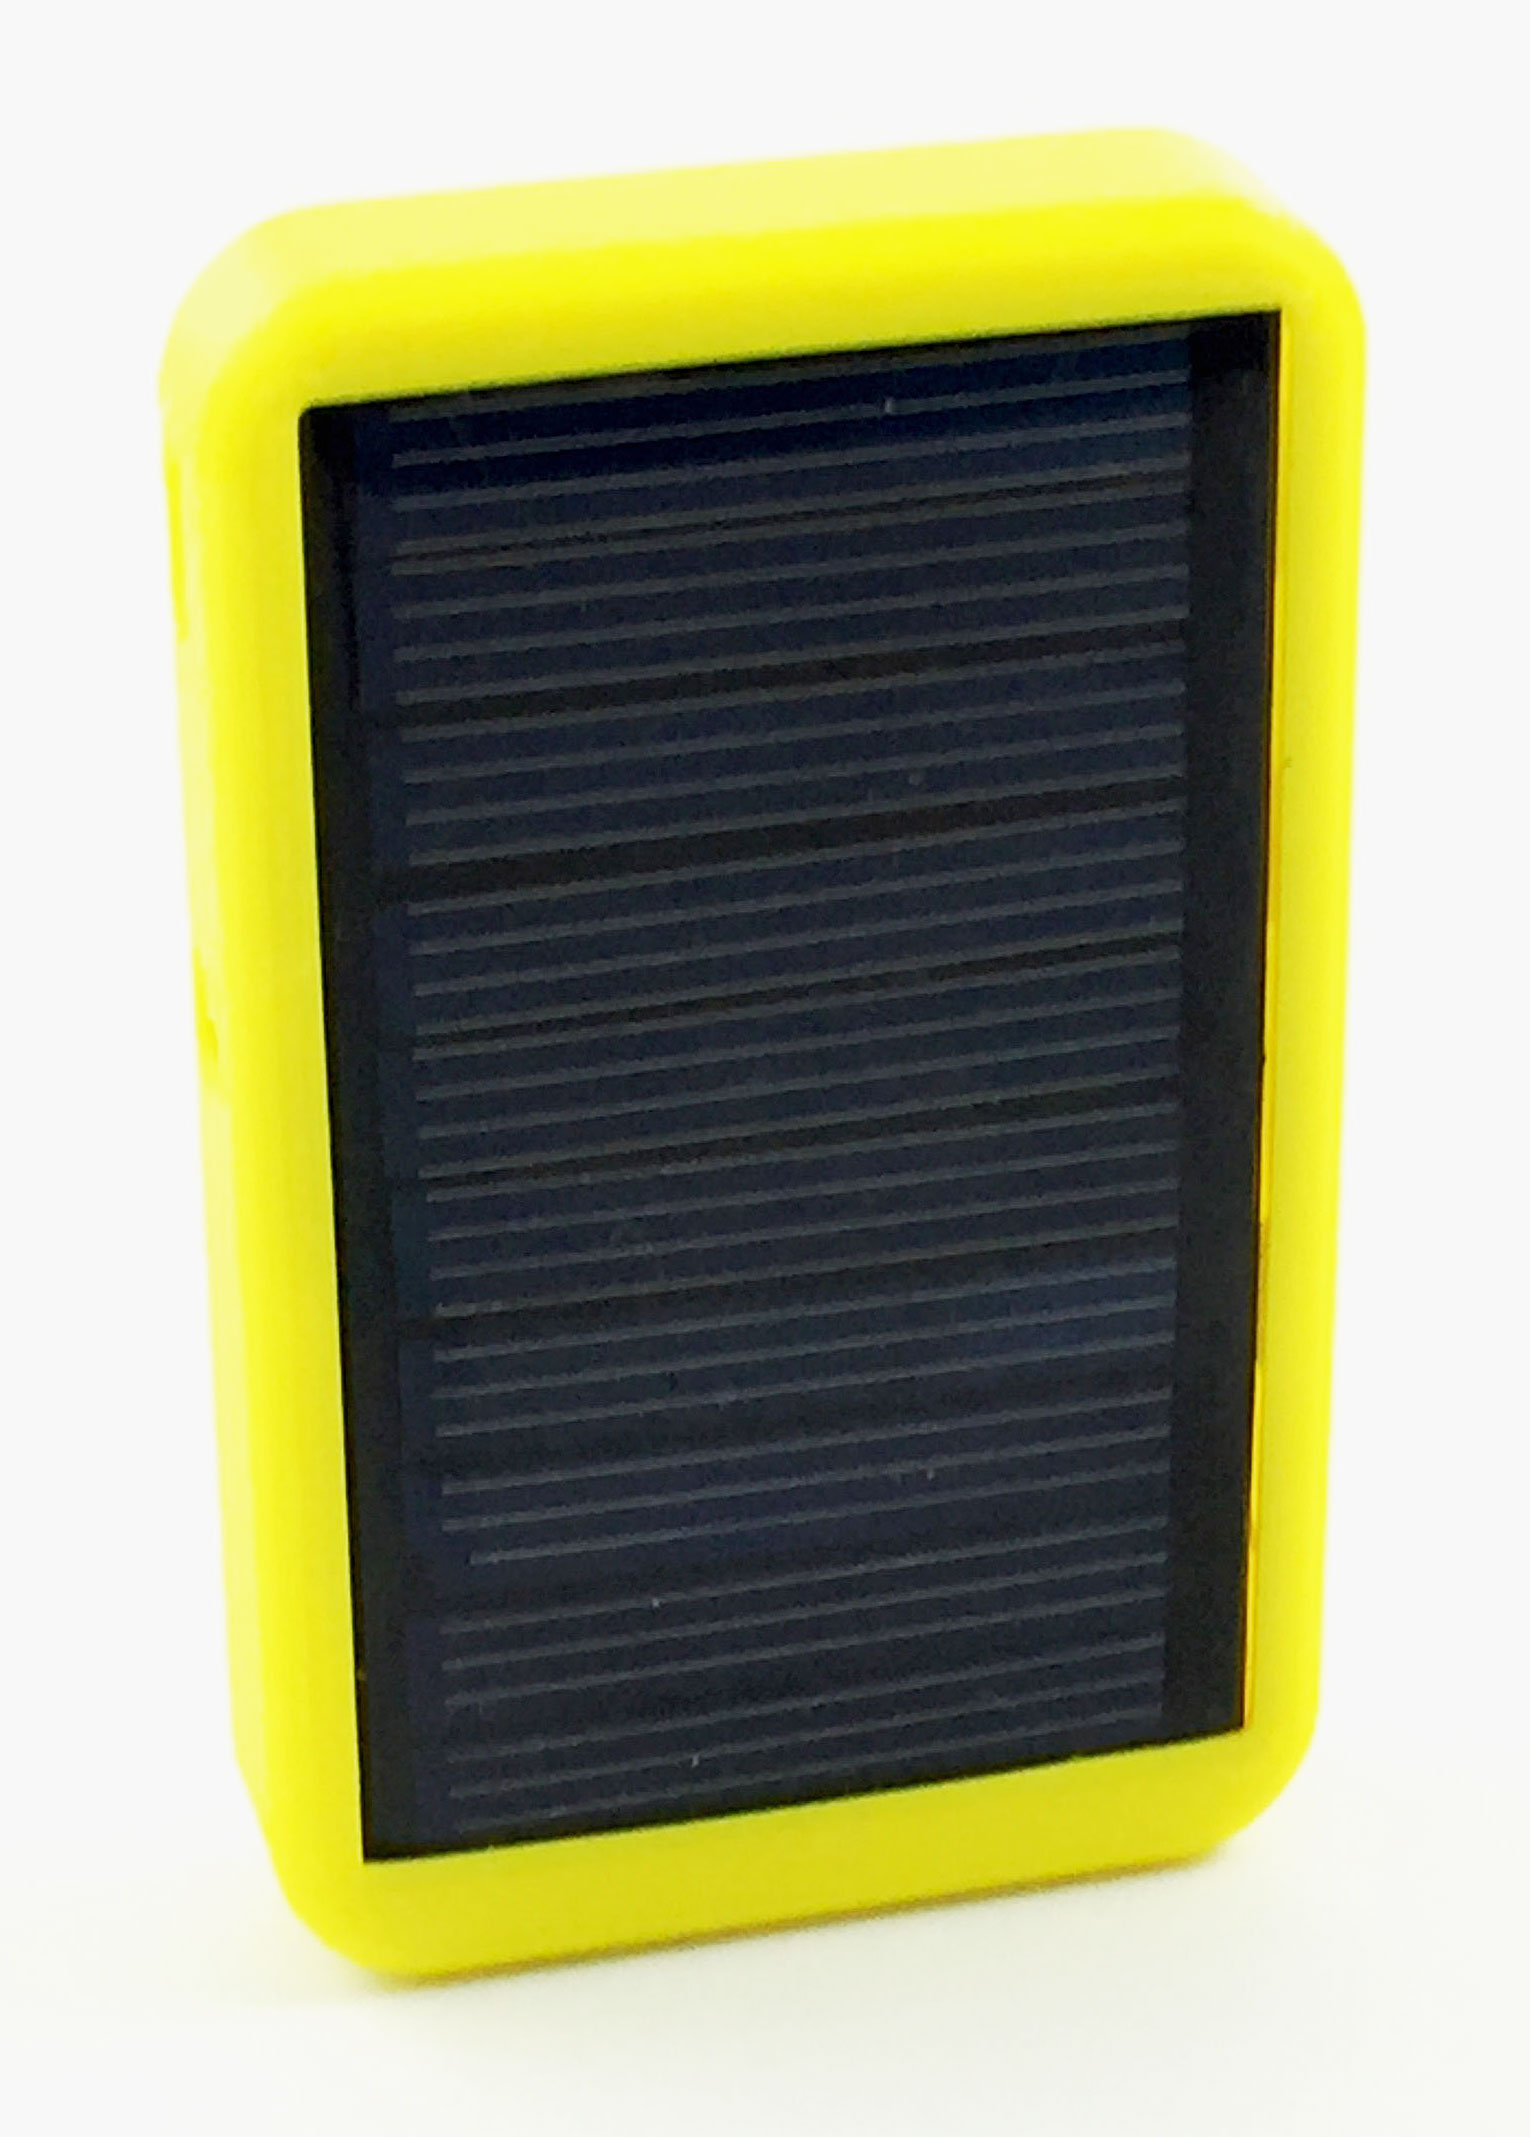 SeedPlayer personal solar player, yellow back, showing solar panel